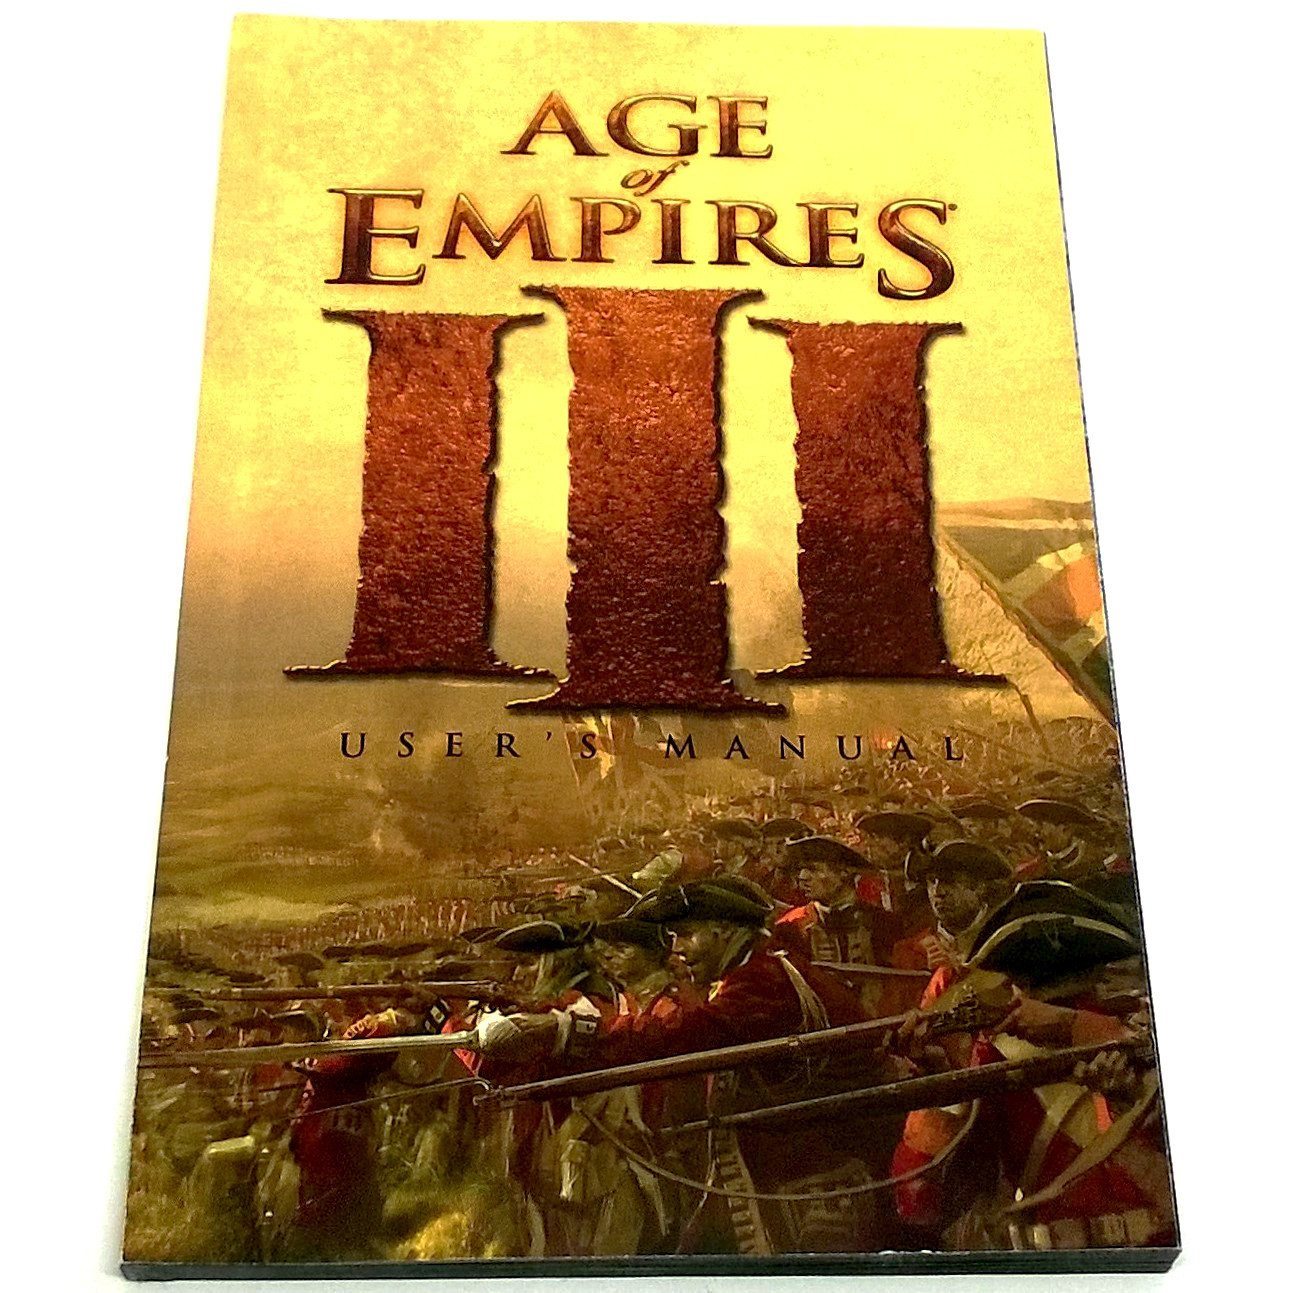 Age of Empires III for PC CD-ROM - Front of manual